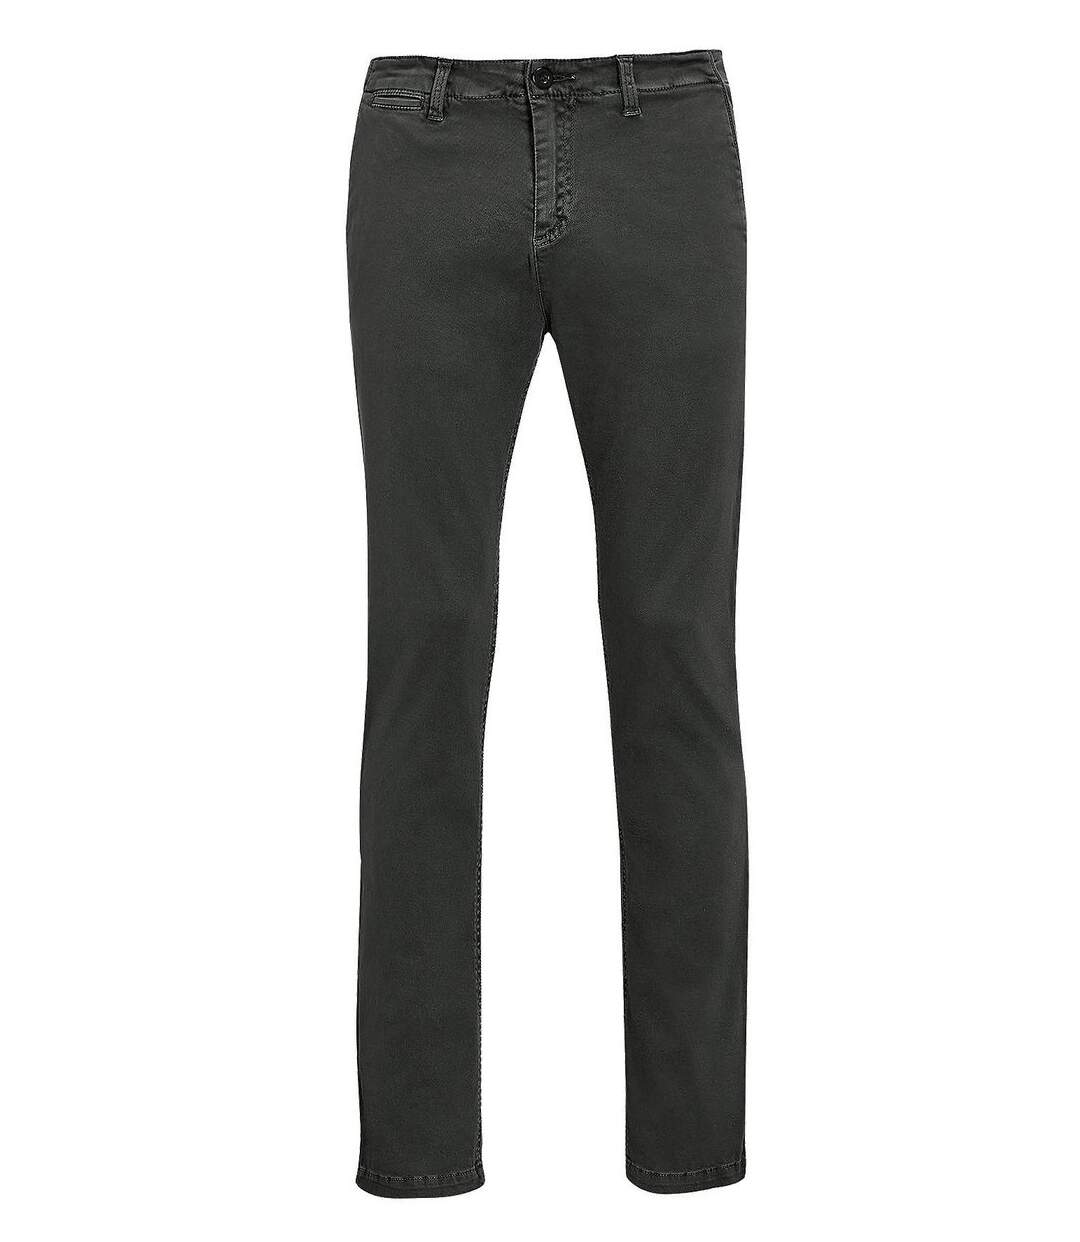 pantalon toile chino stretch homme - 01424 L33 - gris anthracite